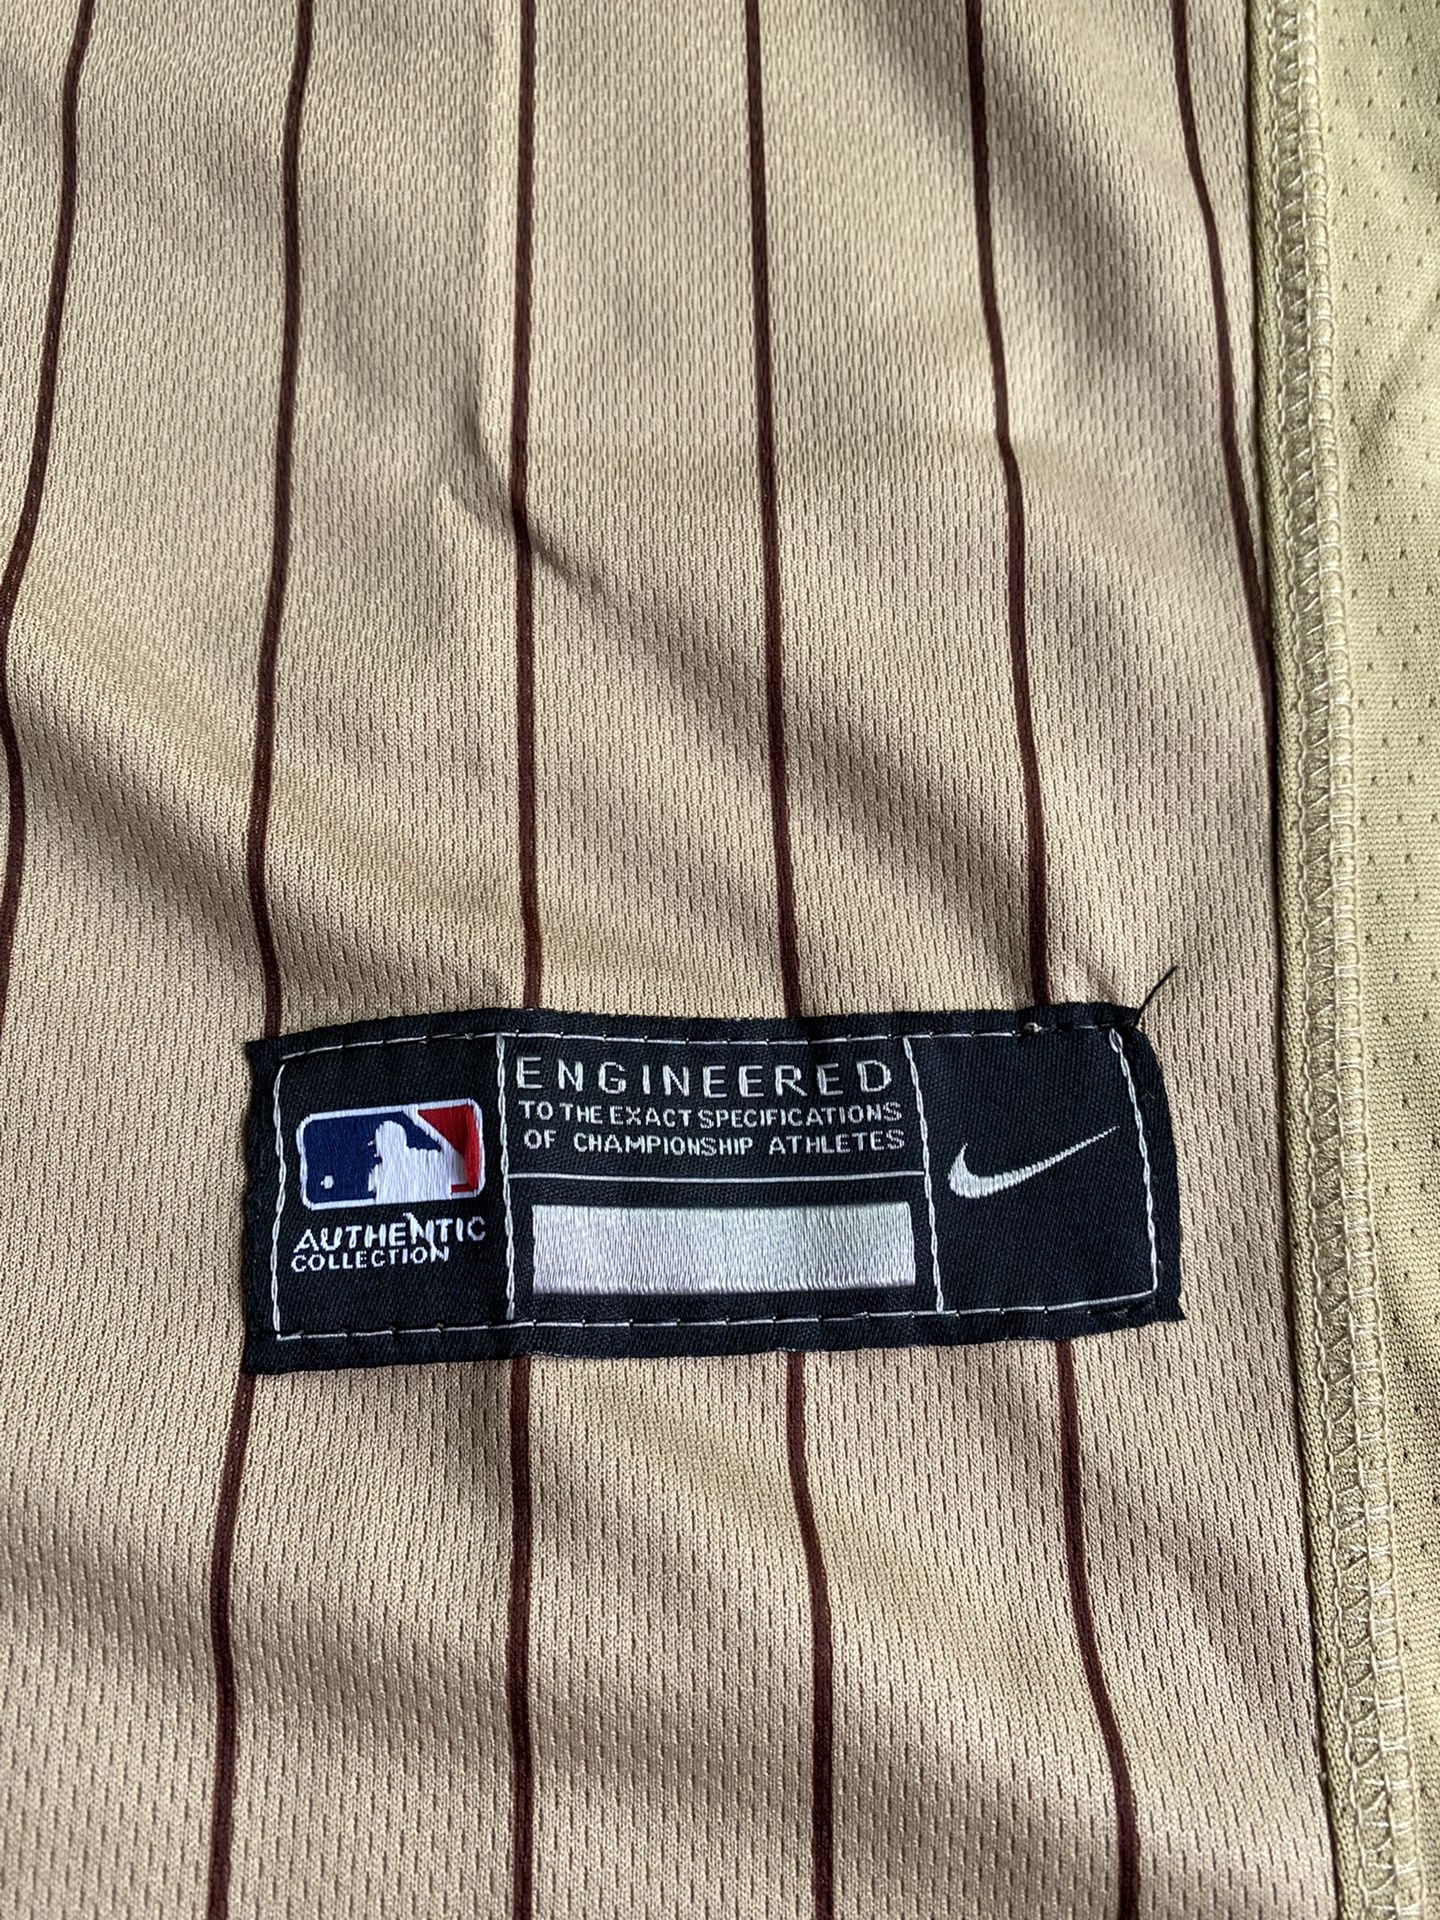 Fernando Tatis Jr Padres Jersey White Gold And Black,Brand New 60$ Large  for Sale in San Diego, CA - OfferUp